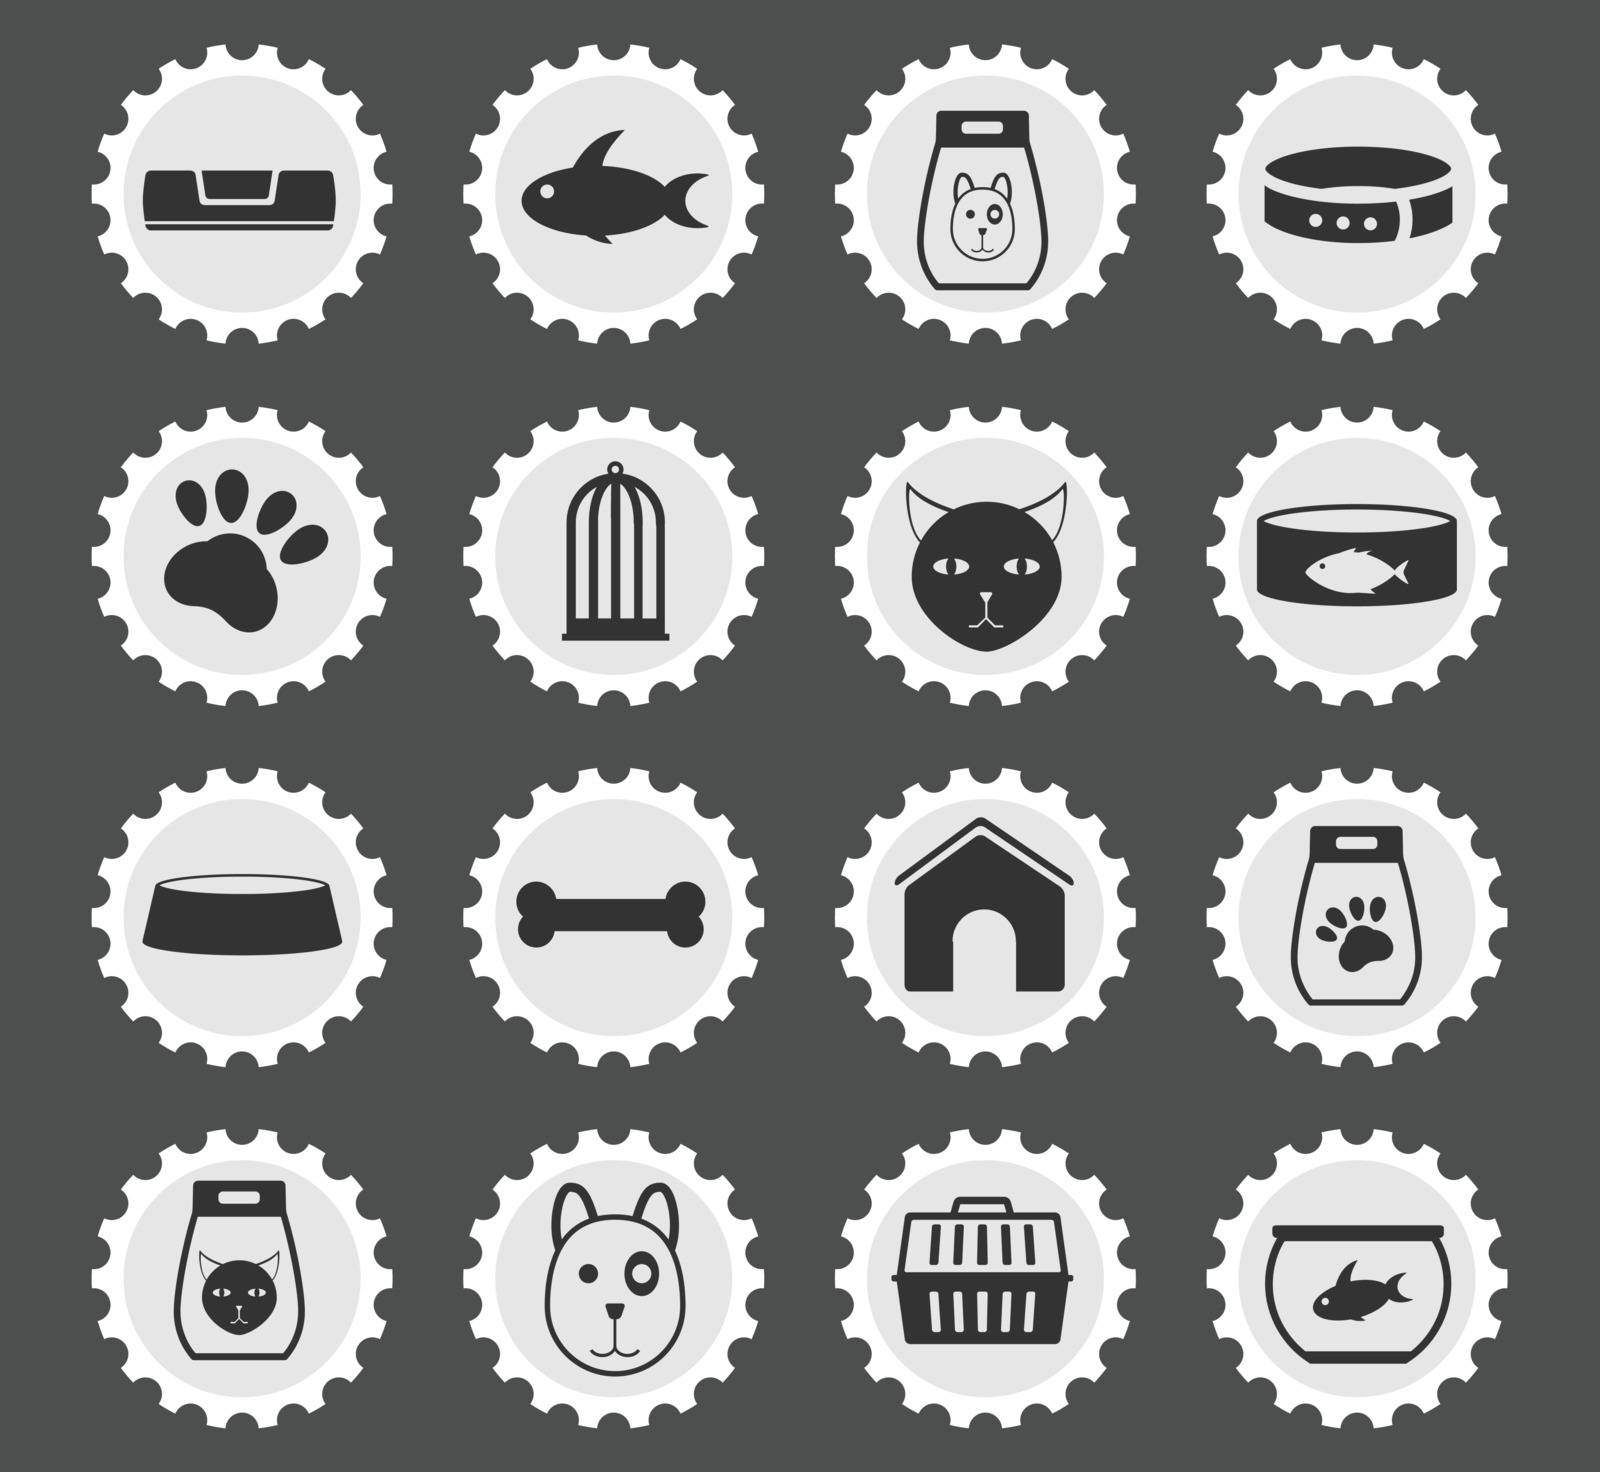 Goods for pets icons for web and user interfaces